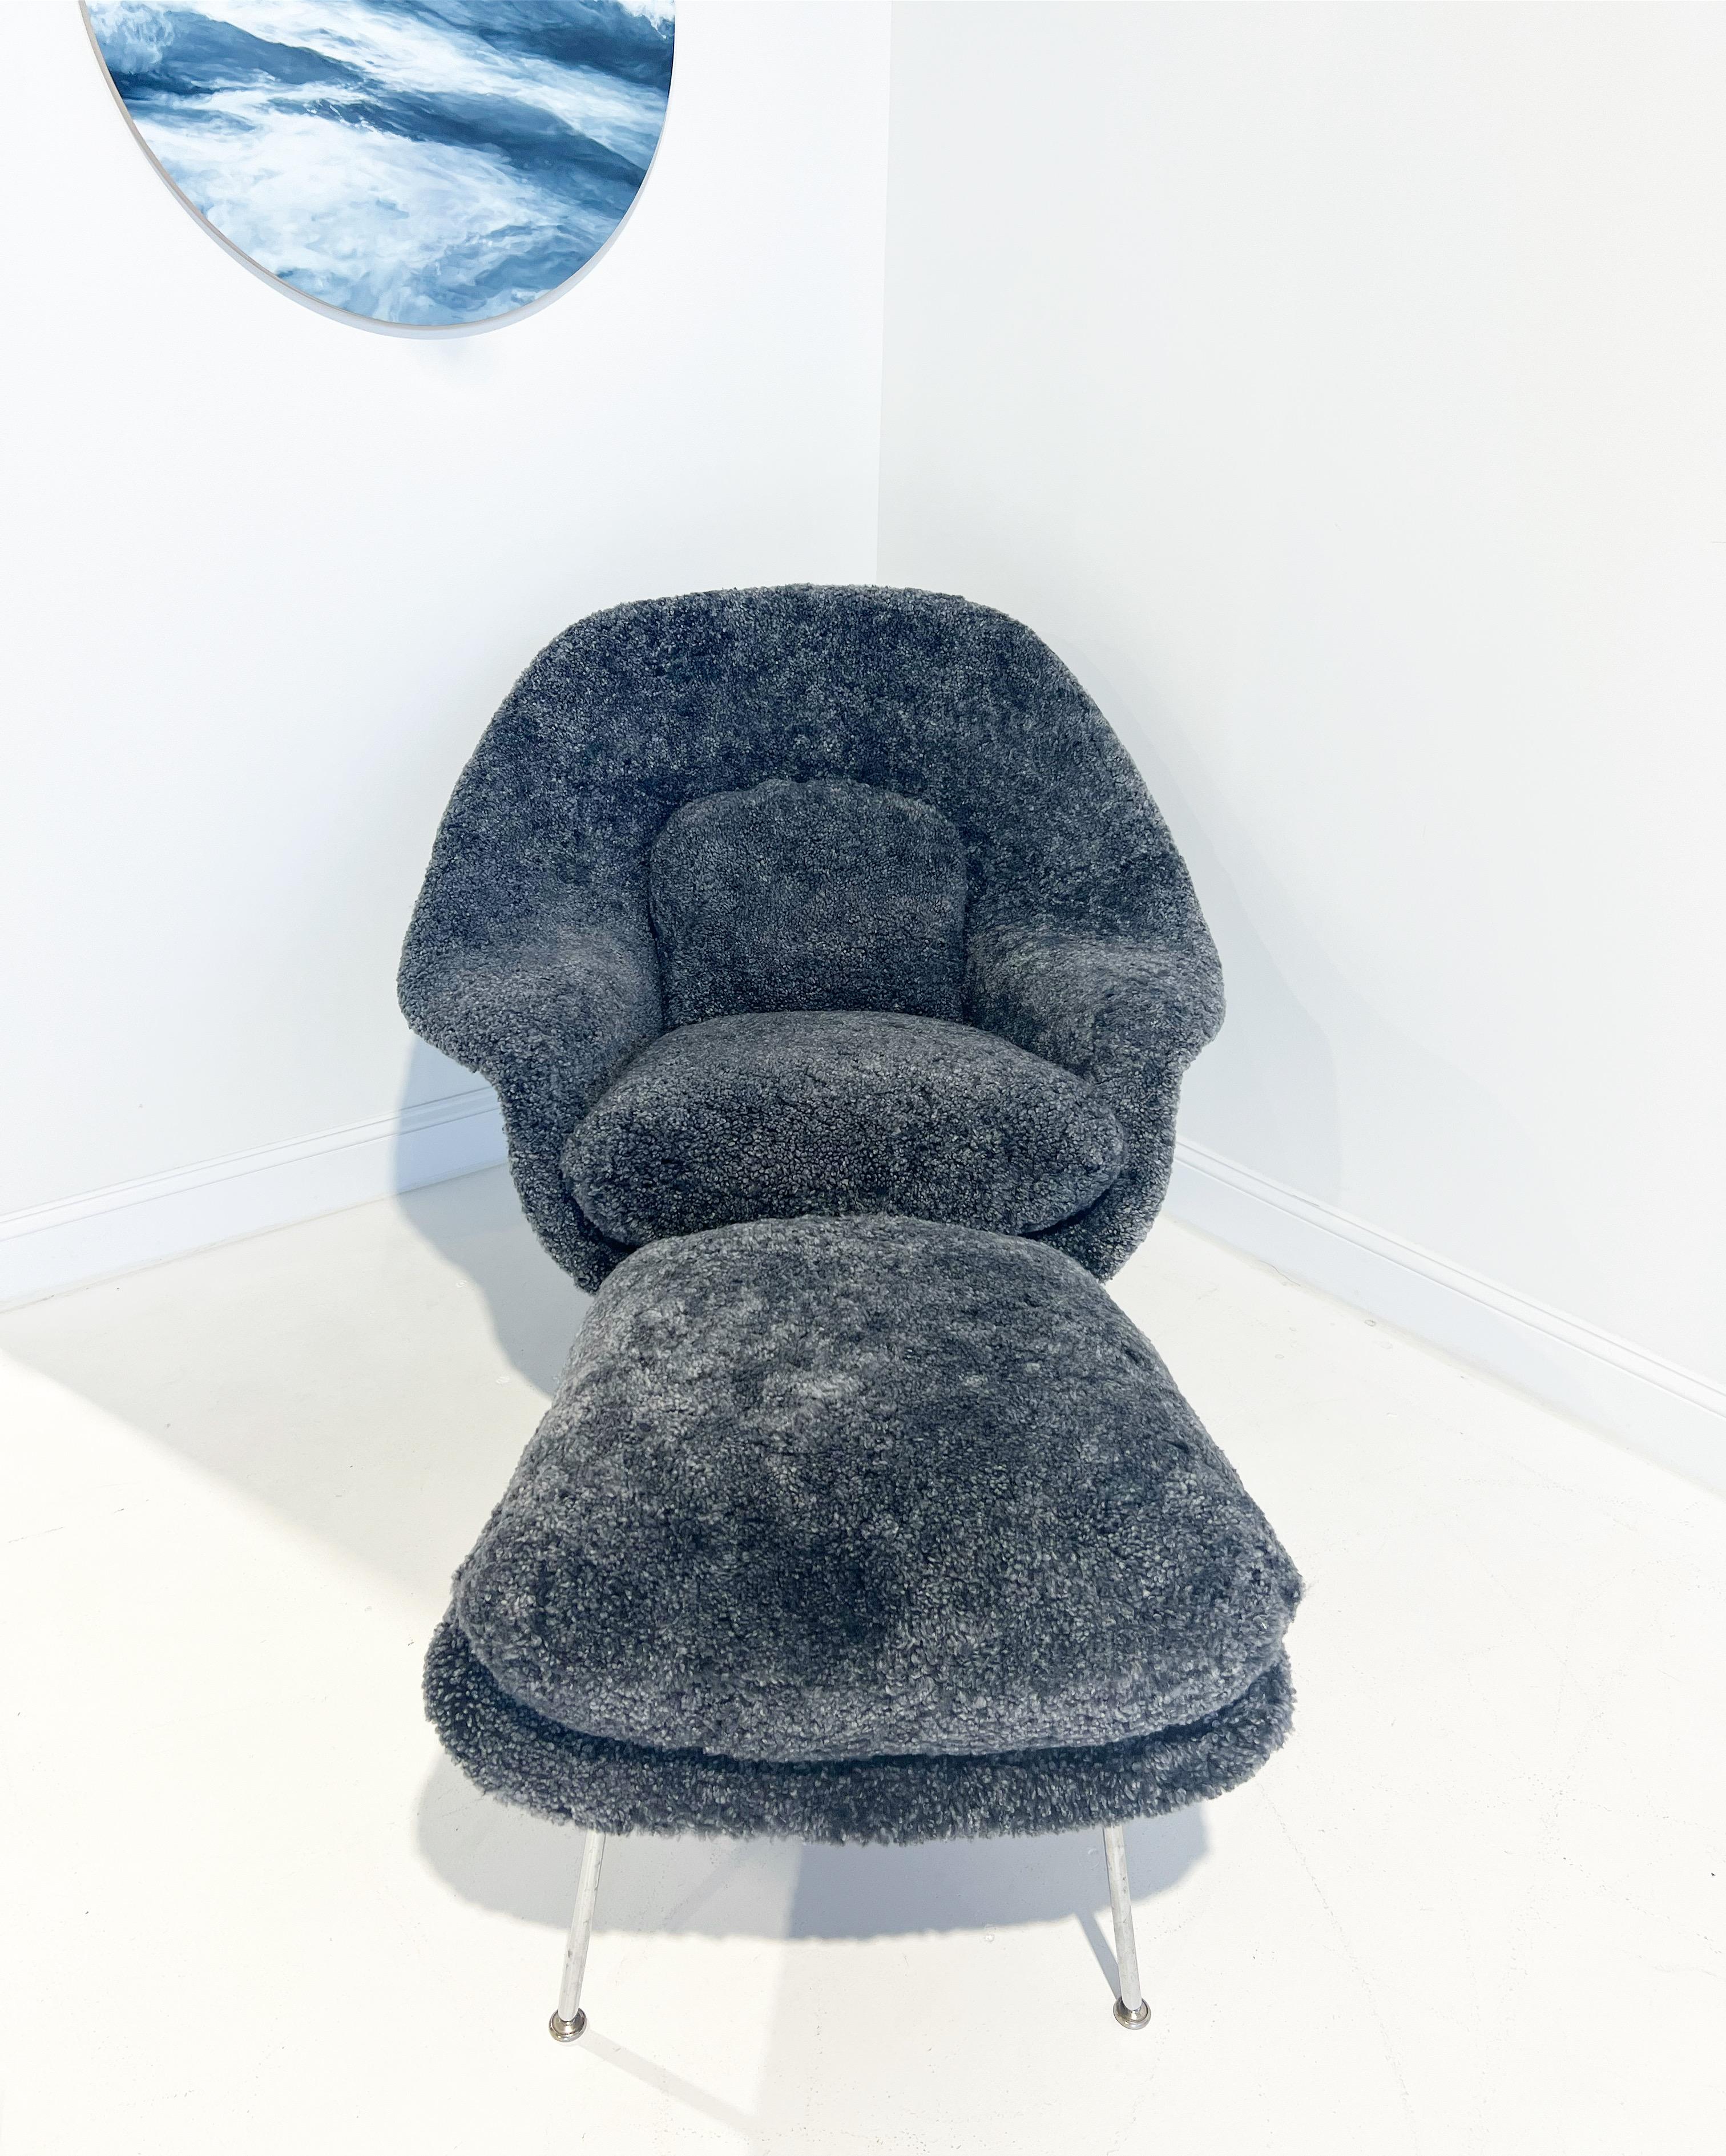 Contemporary Forsyth Bespoke Eero Saarinen Womb Chair and Ottoman in Shearling For Sale